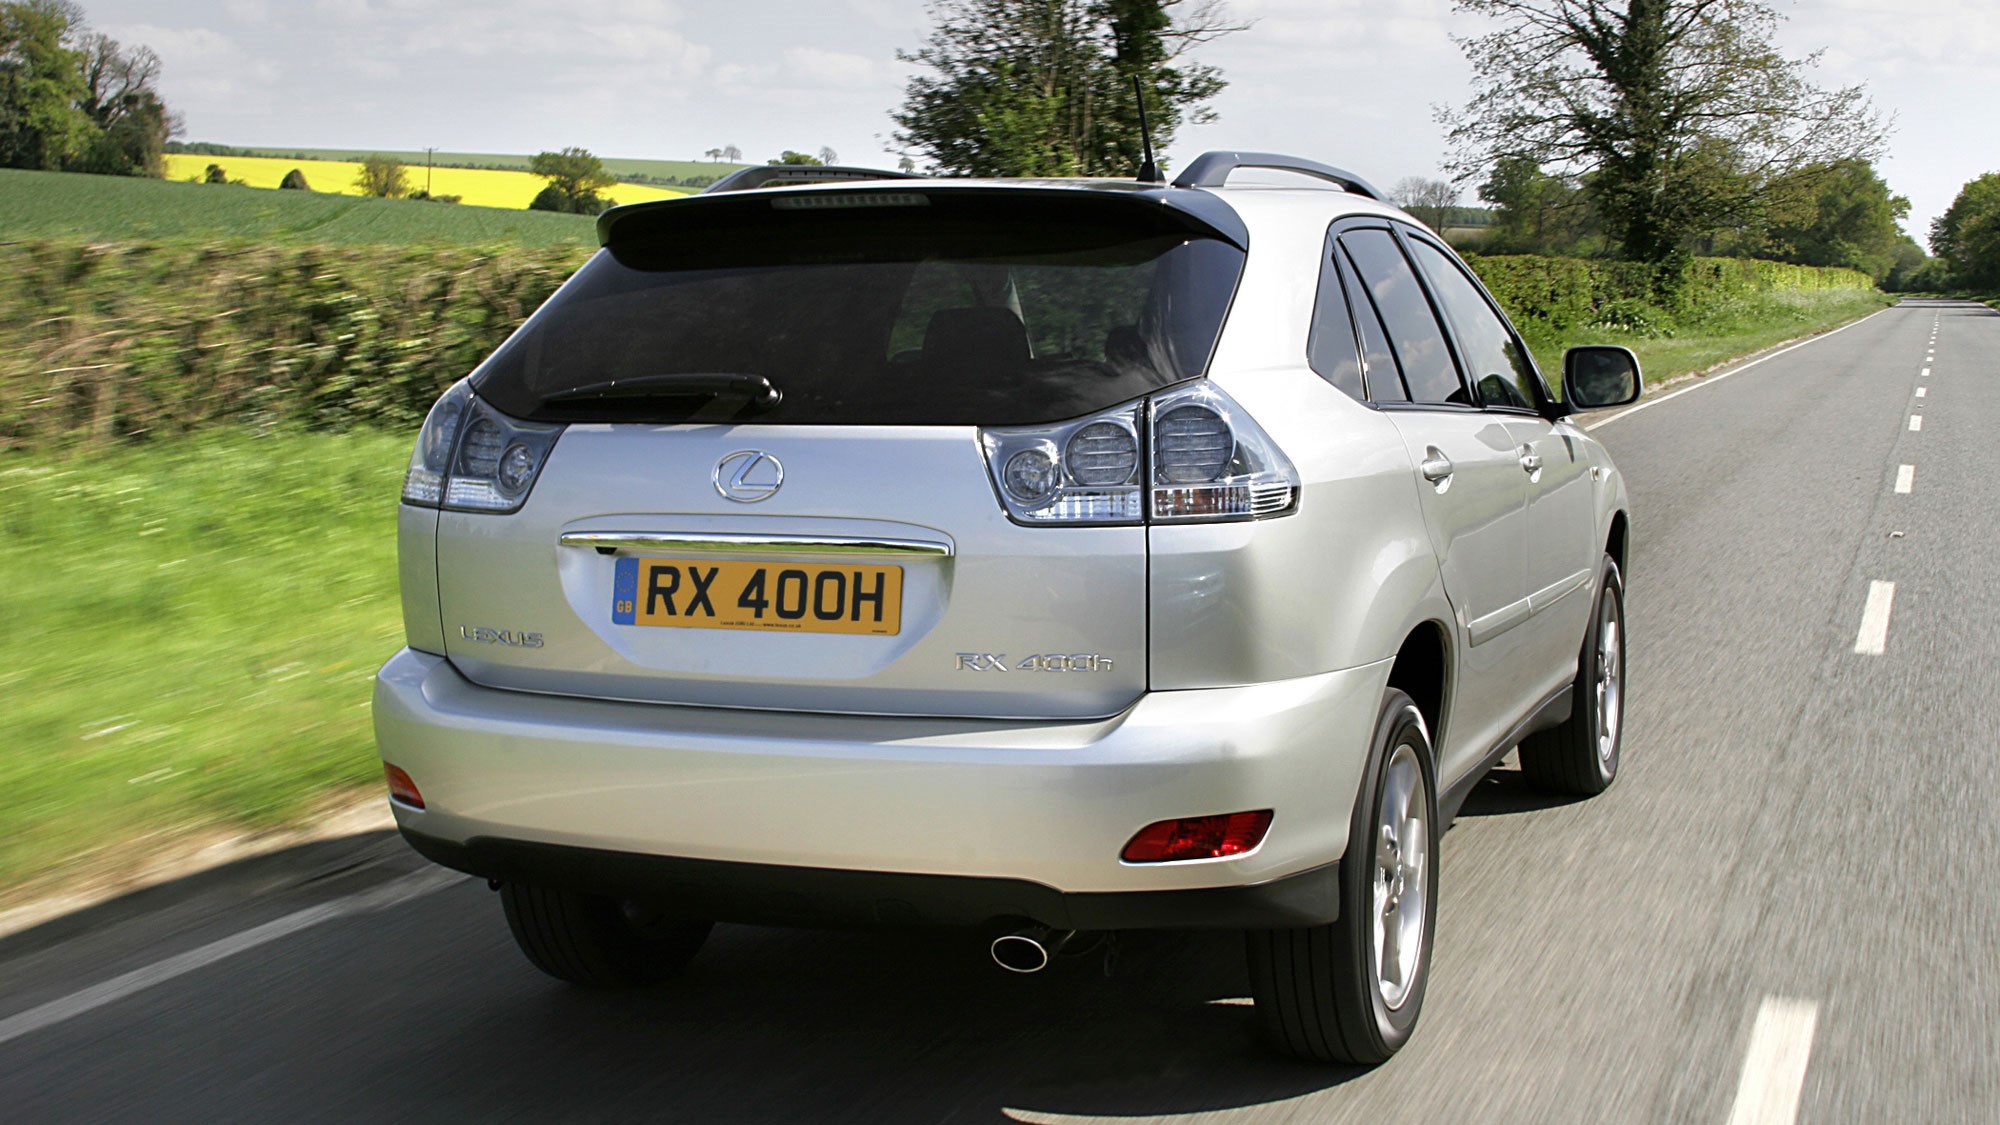 Lexus RX400h hybrid SUV review - rear view, silver, driving